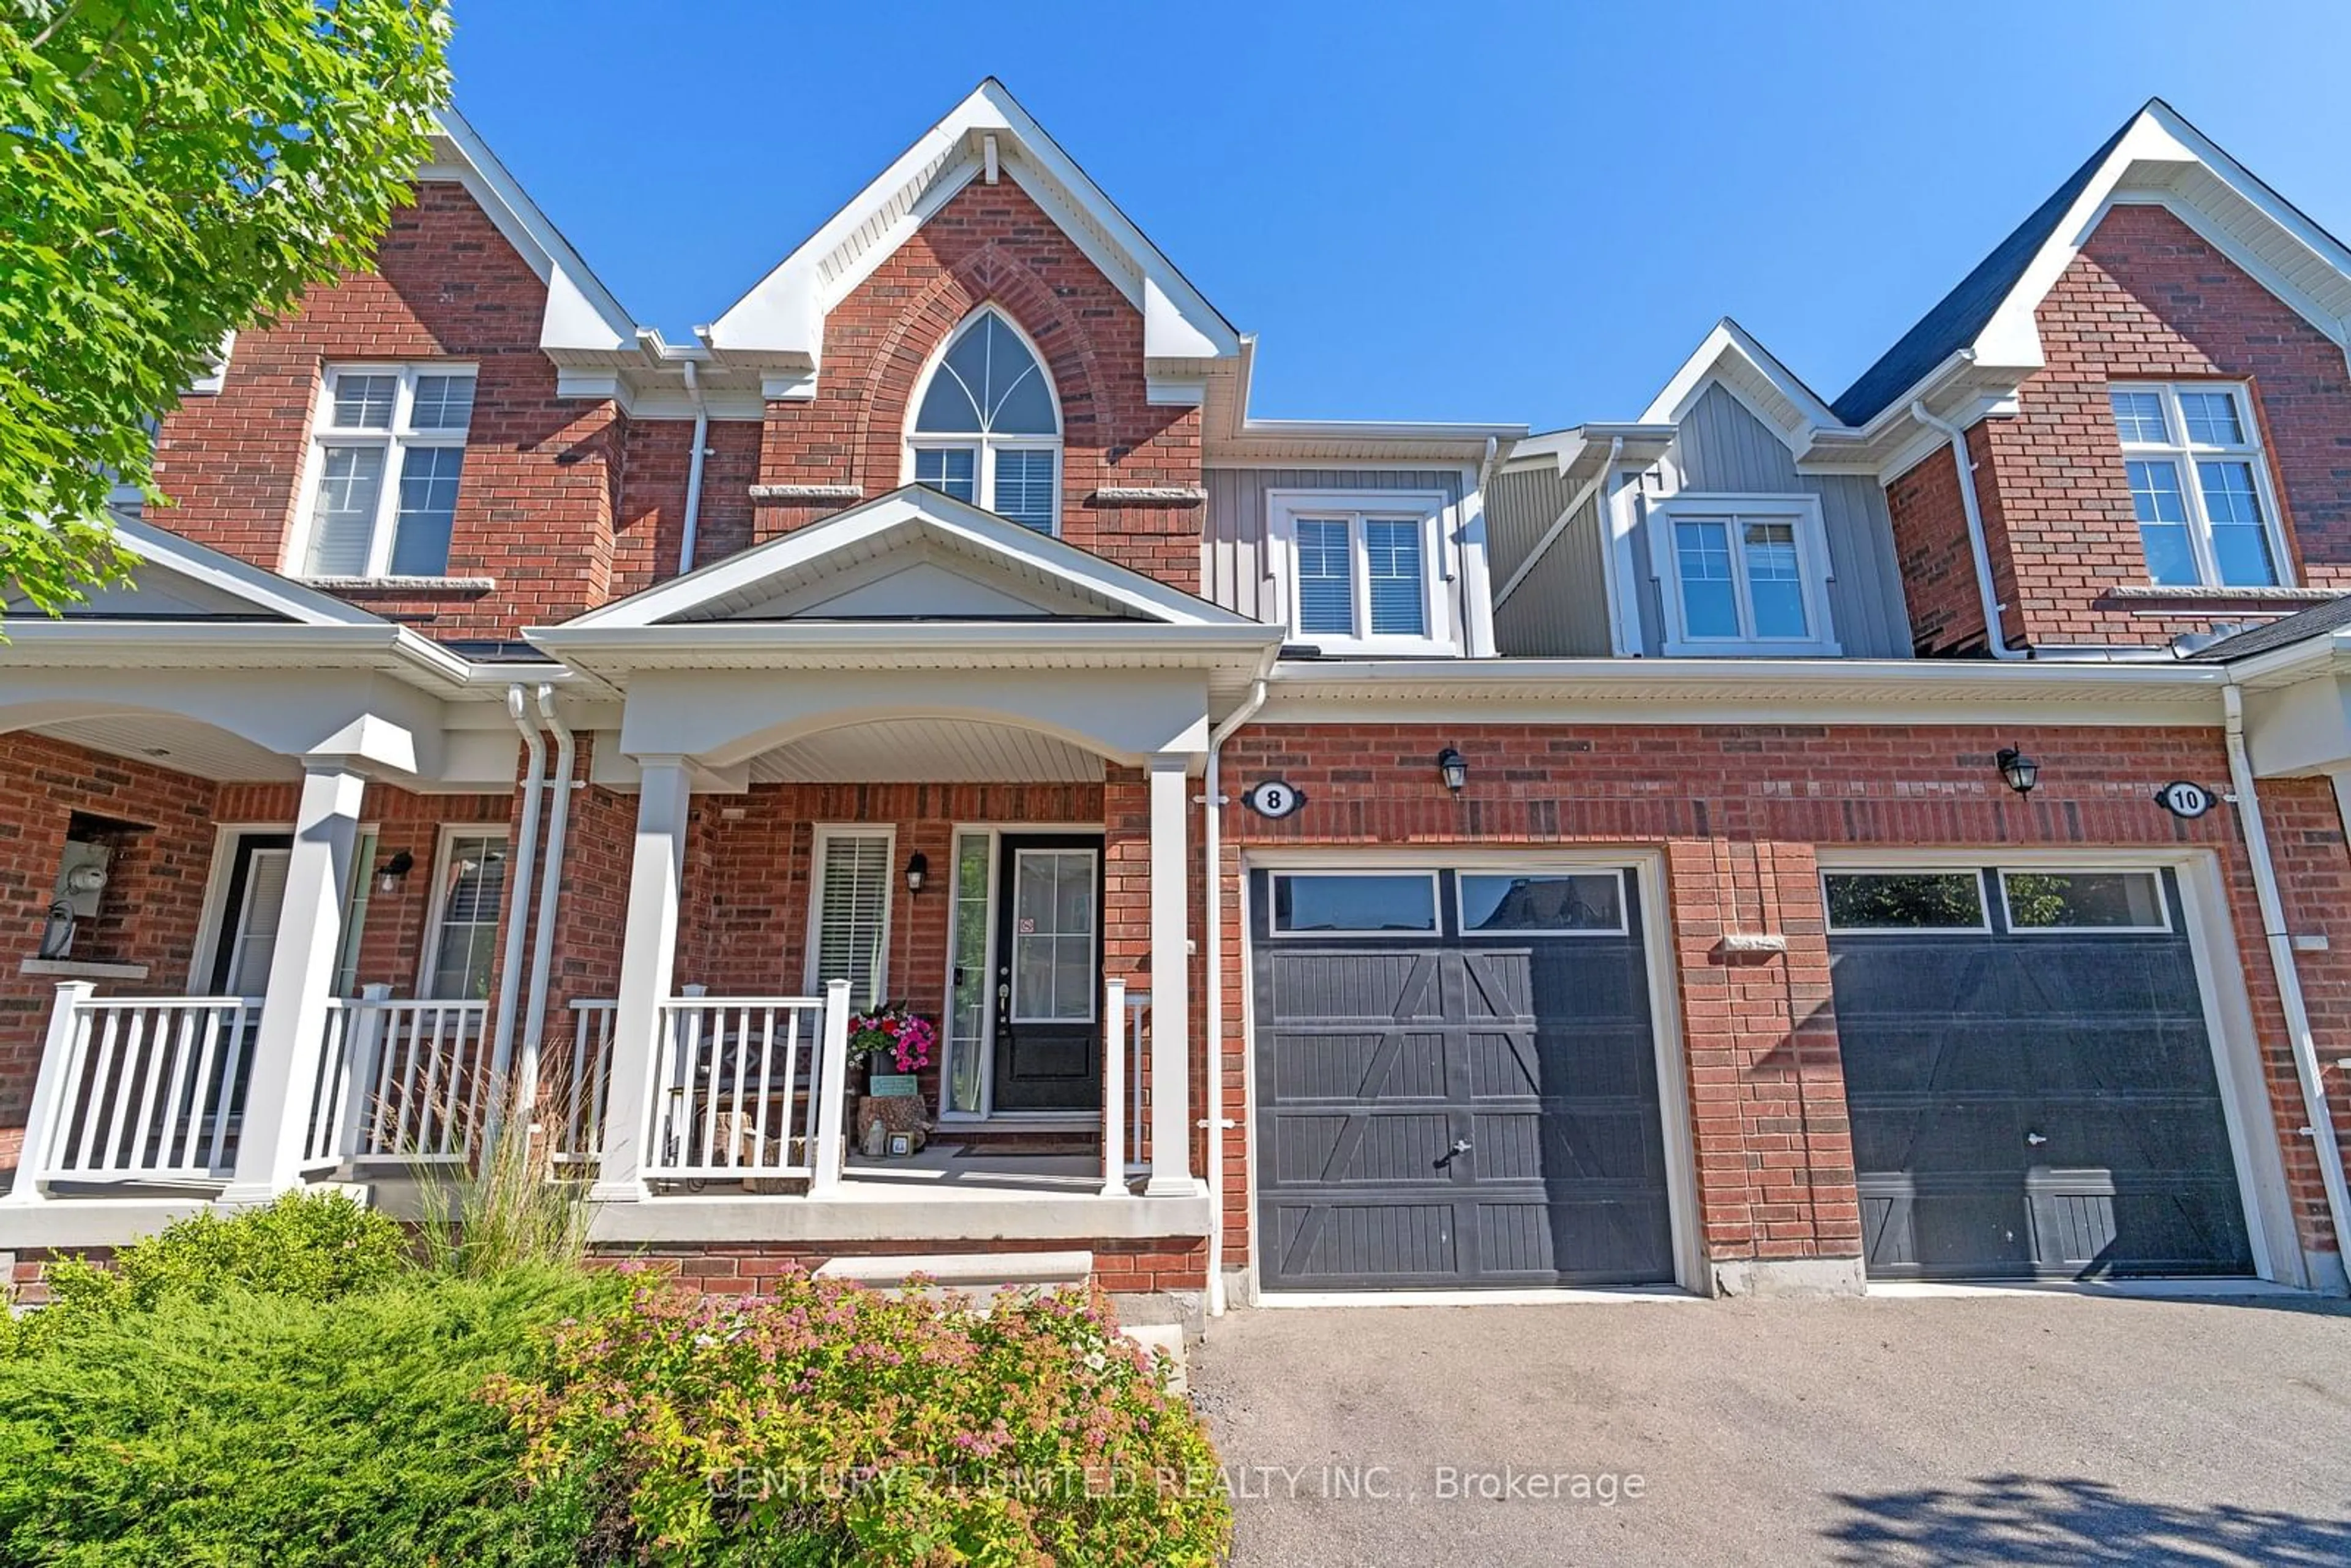 Home with brick exterior material for 8 Lambdon Way, Whitby Ontario L1M 2M1